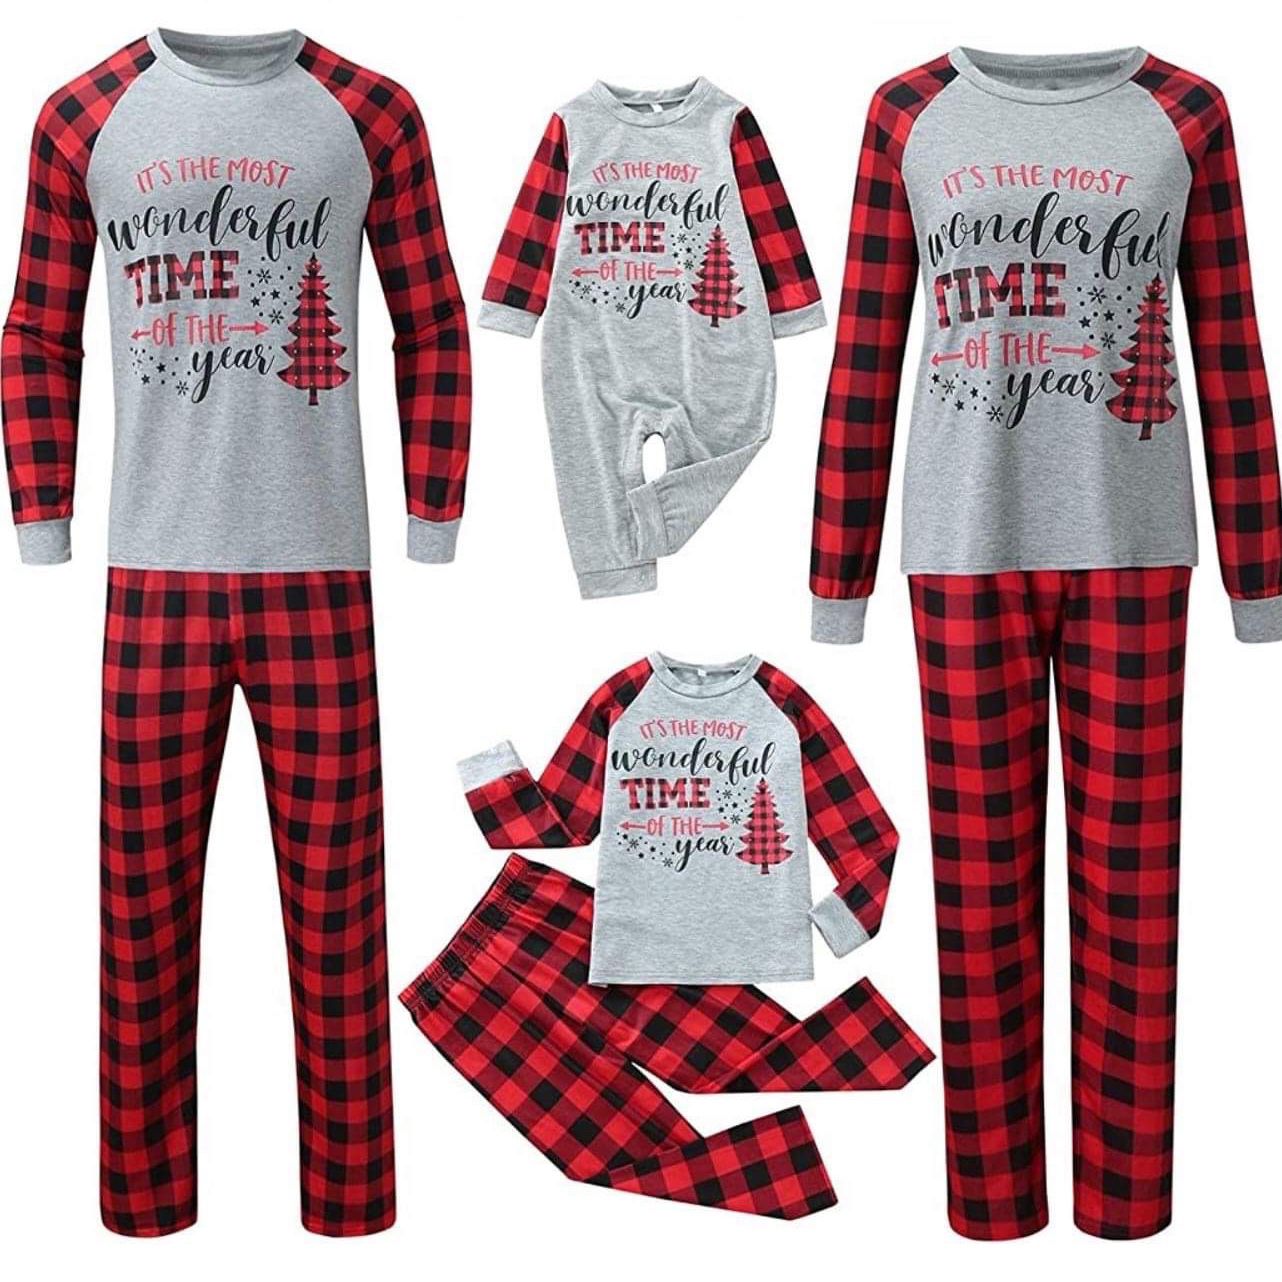 New Family Matching Pajamas - Inquire About Sizes Needed For Price 